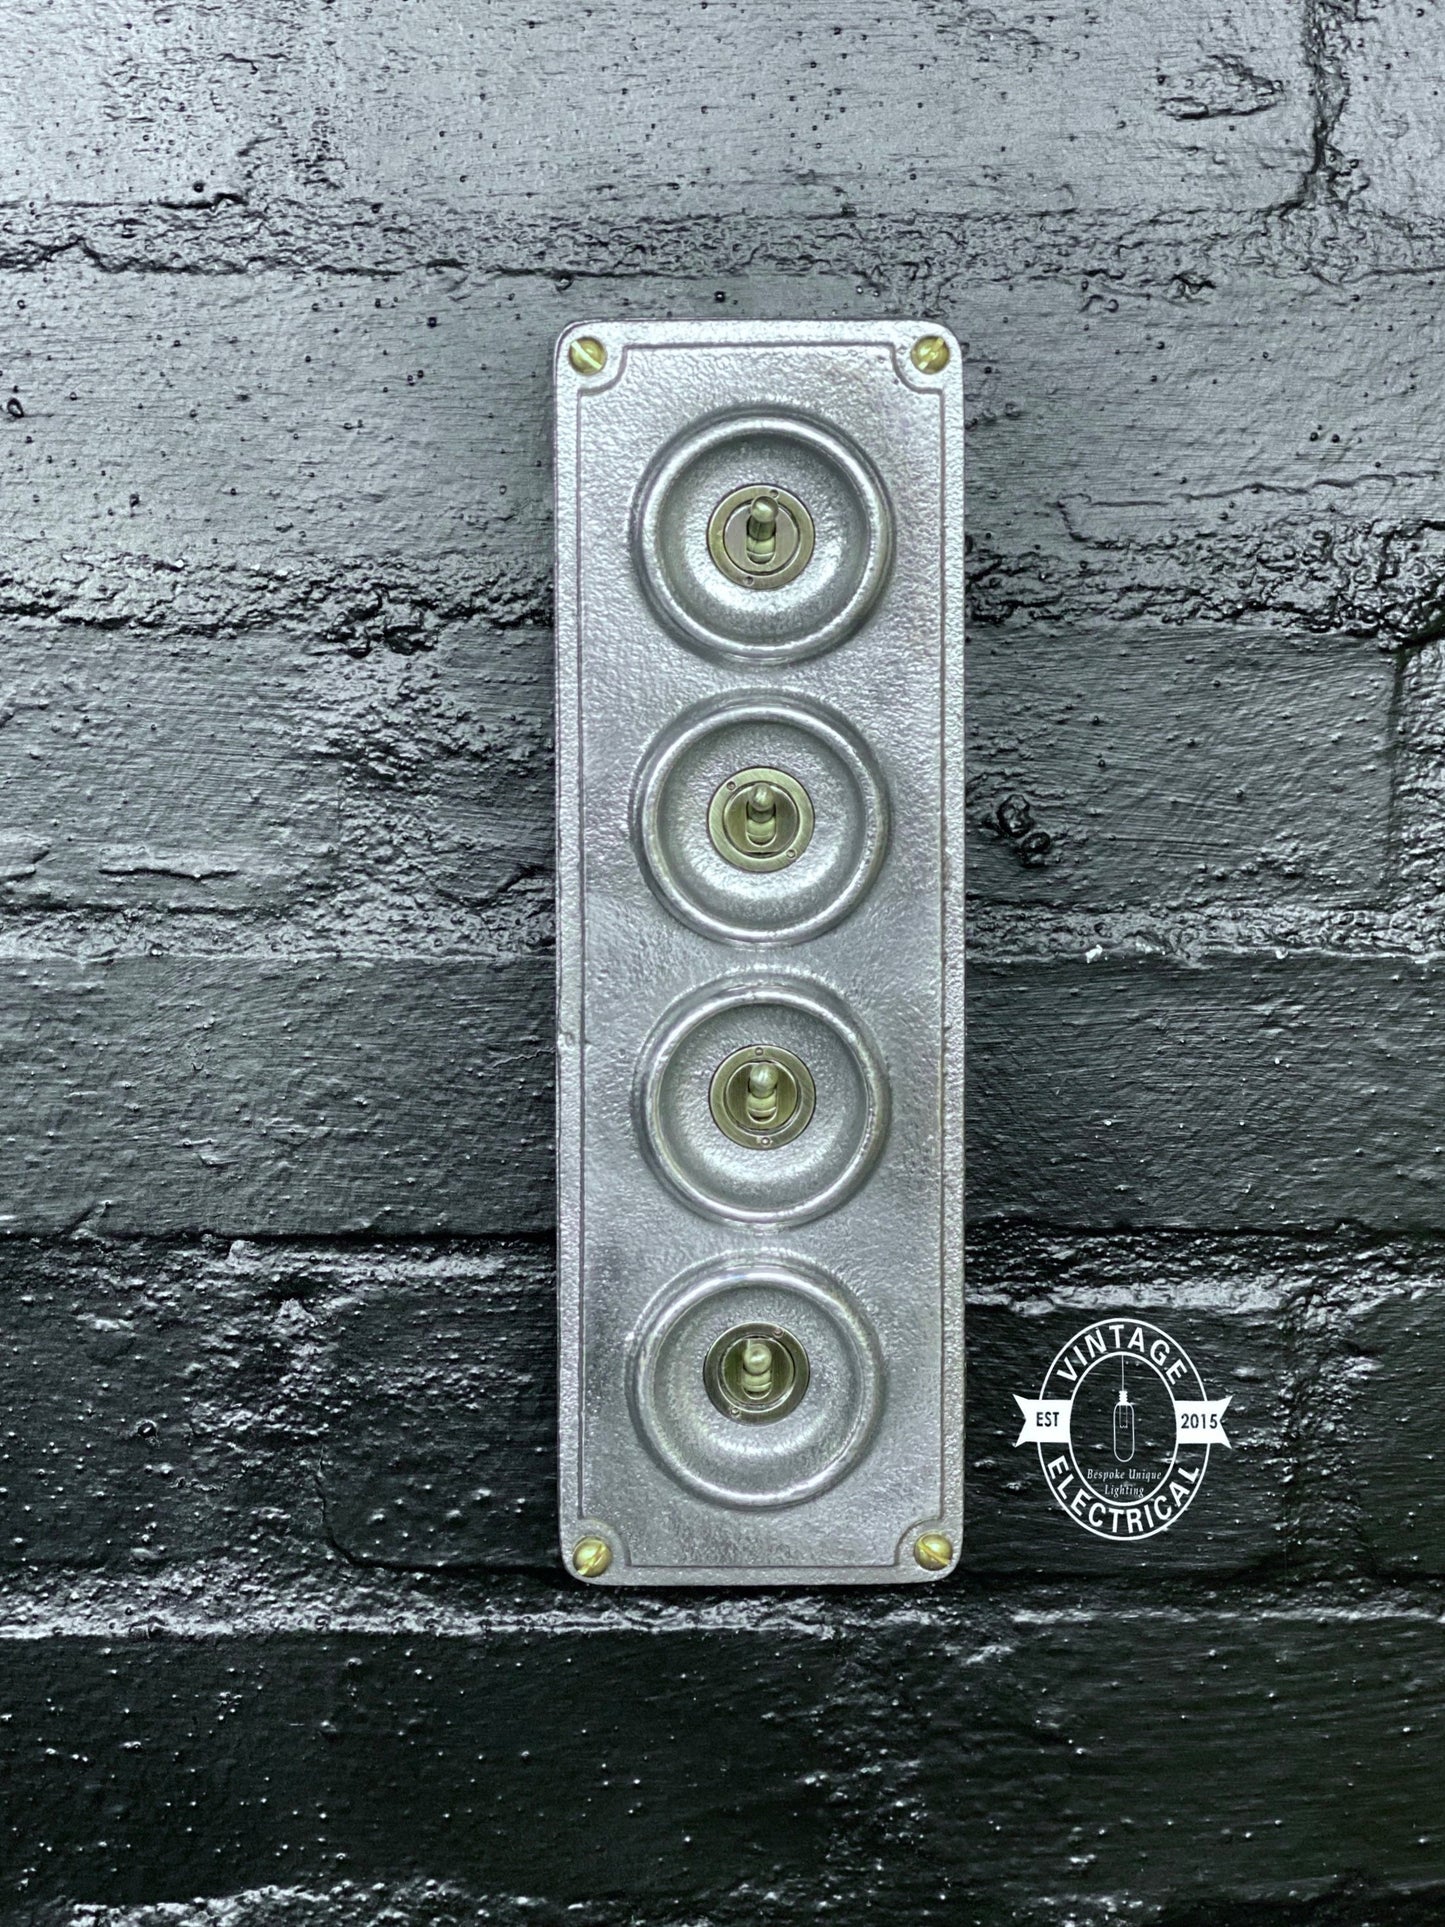 4 Gang 2 Way Solid Cast Metal Light Conduit Switch Industrial - BS EN Approved Vintage Crabtree 1950’s Style